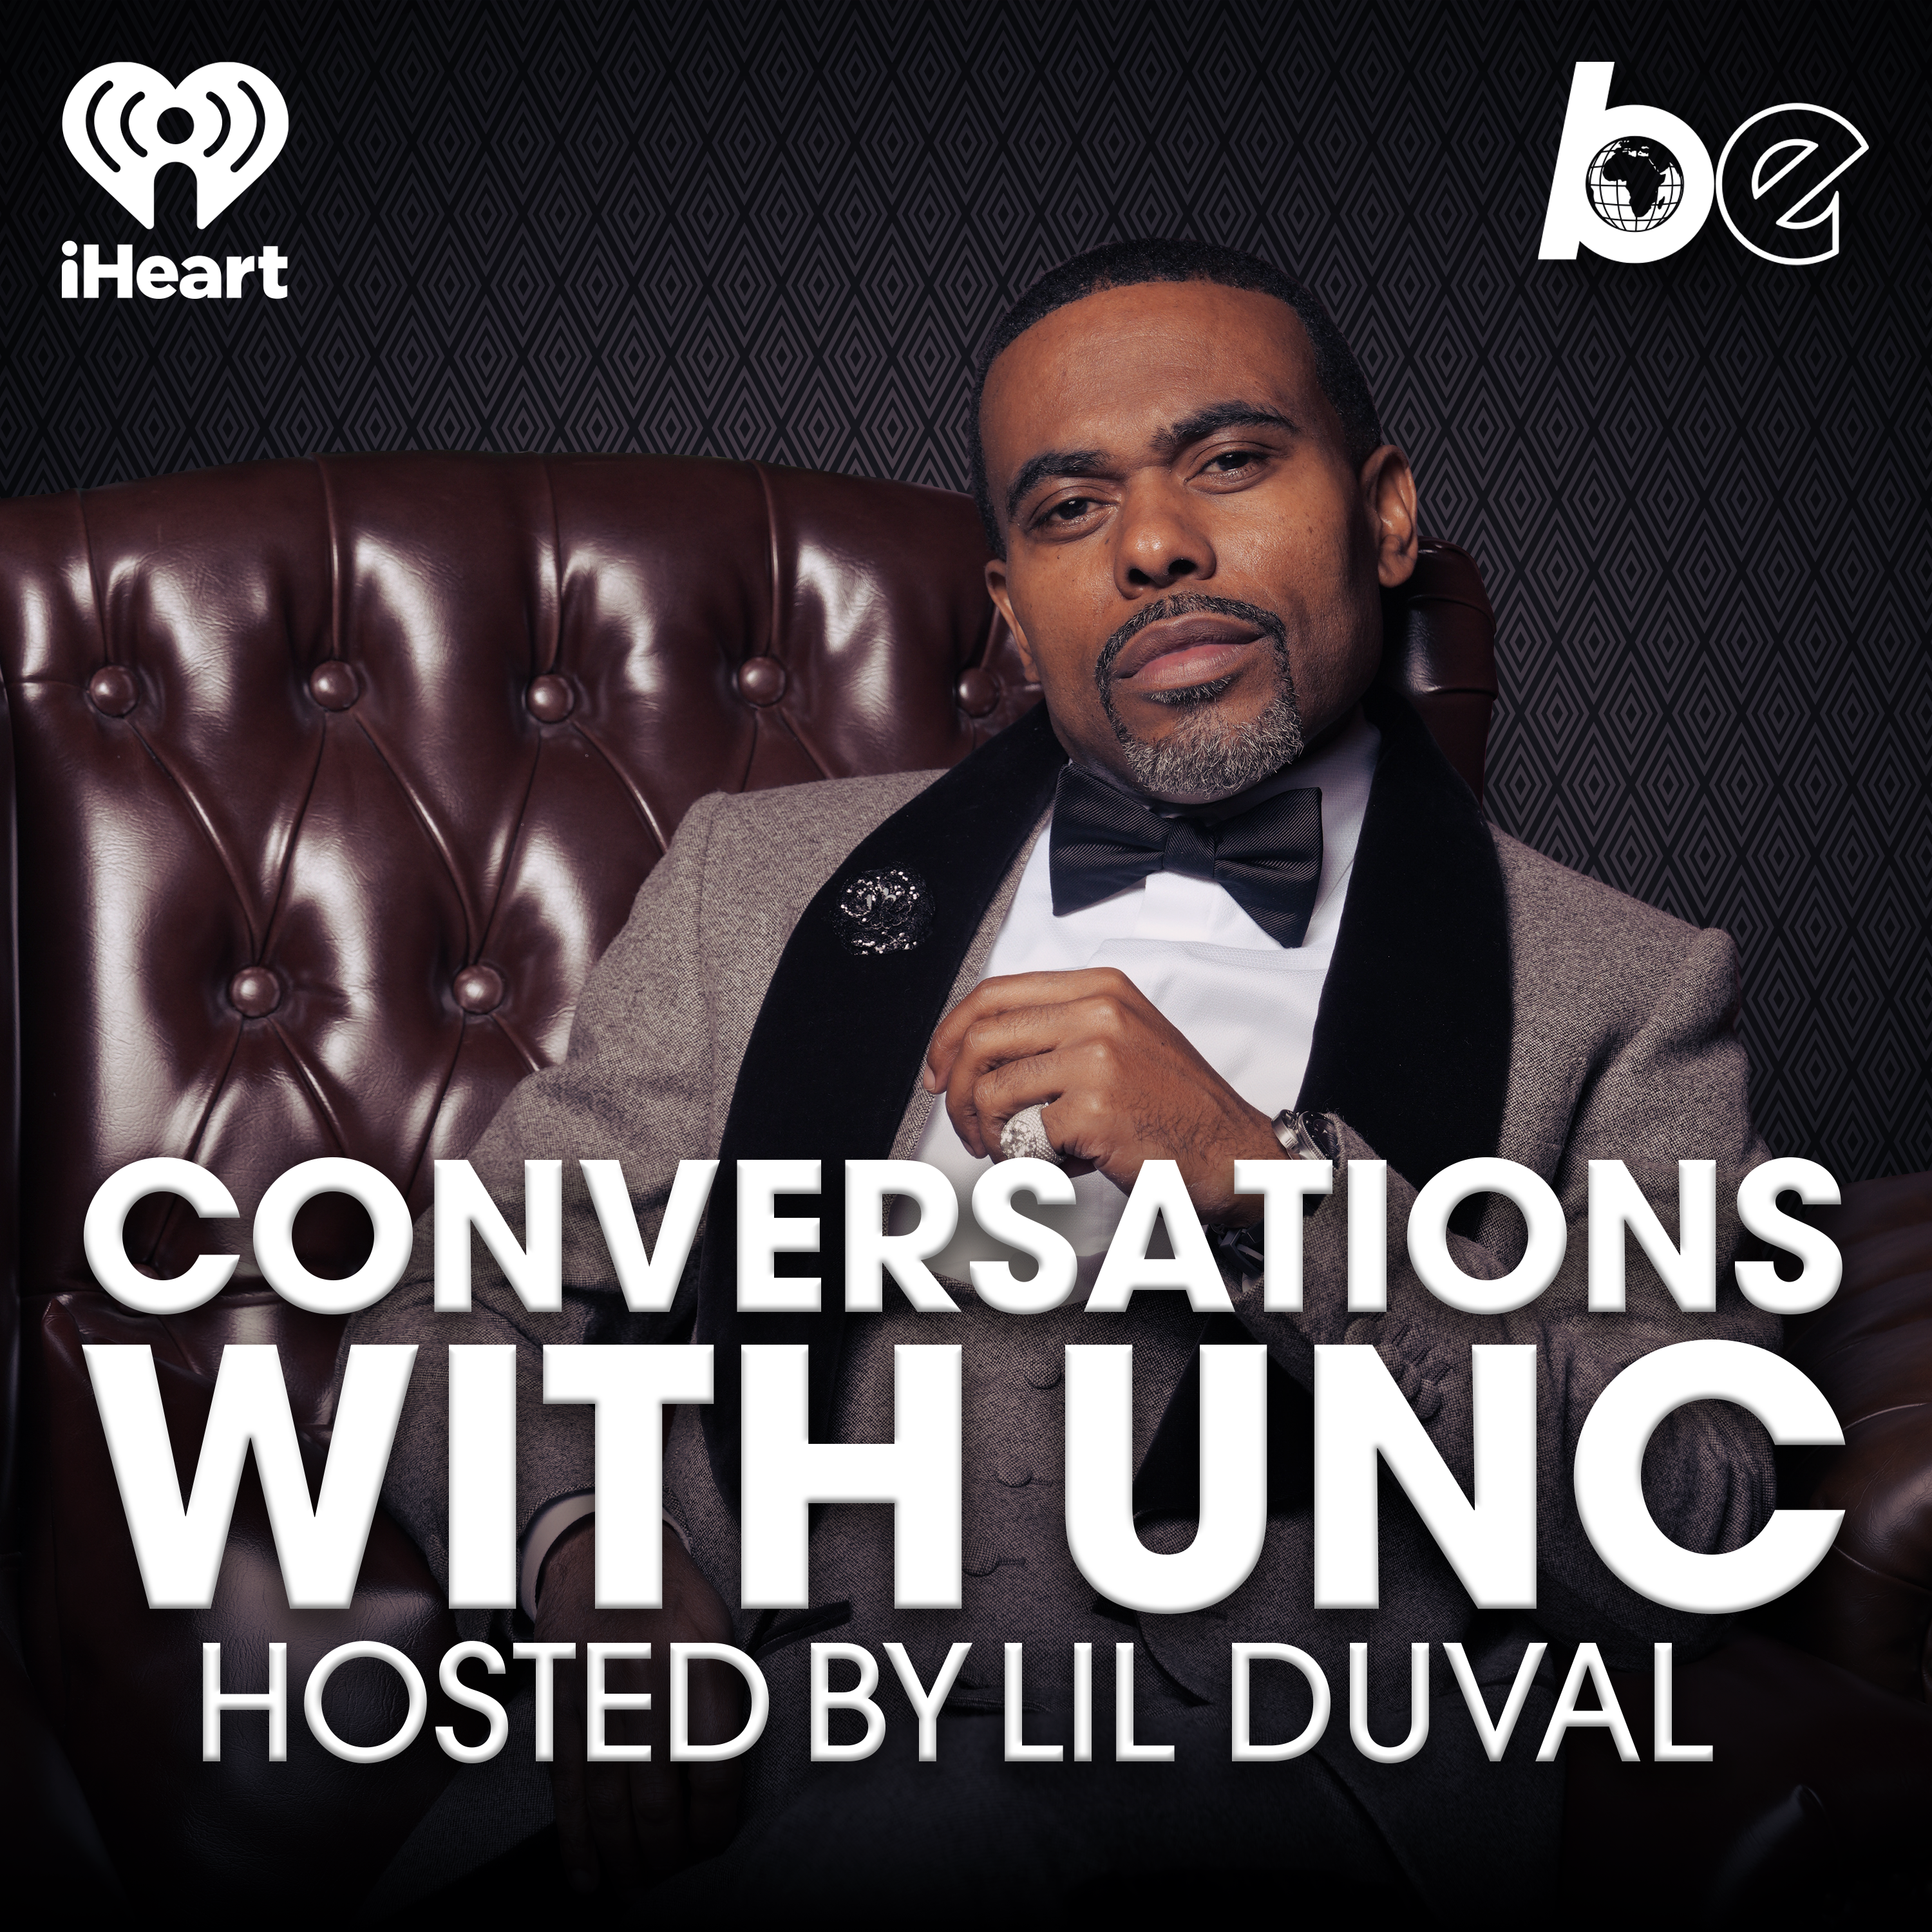 Conversations with Unc: The Dynamic Trio with Gizelle Bryant and Robyn Dixon